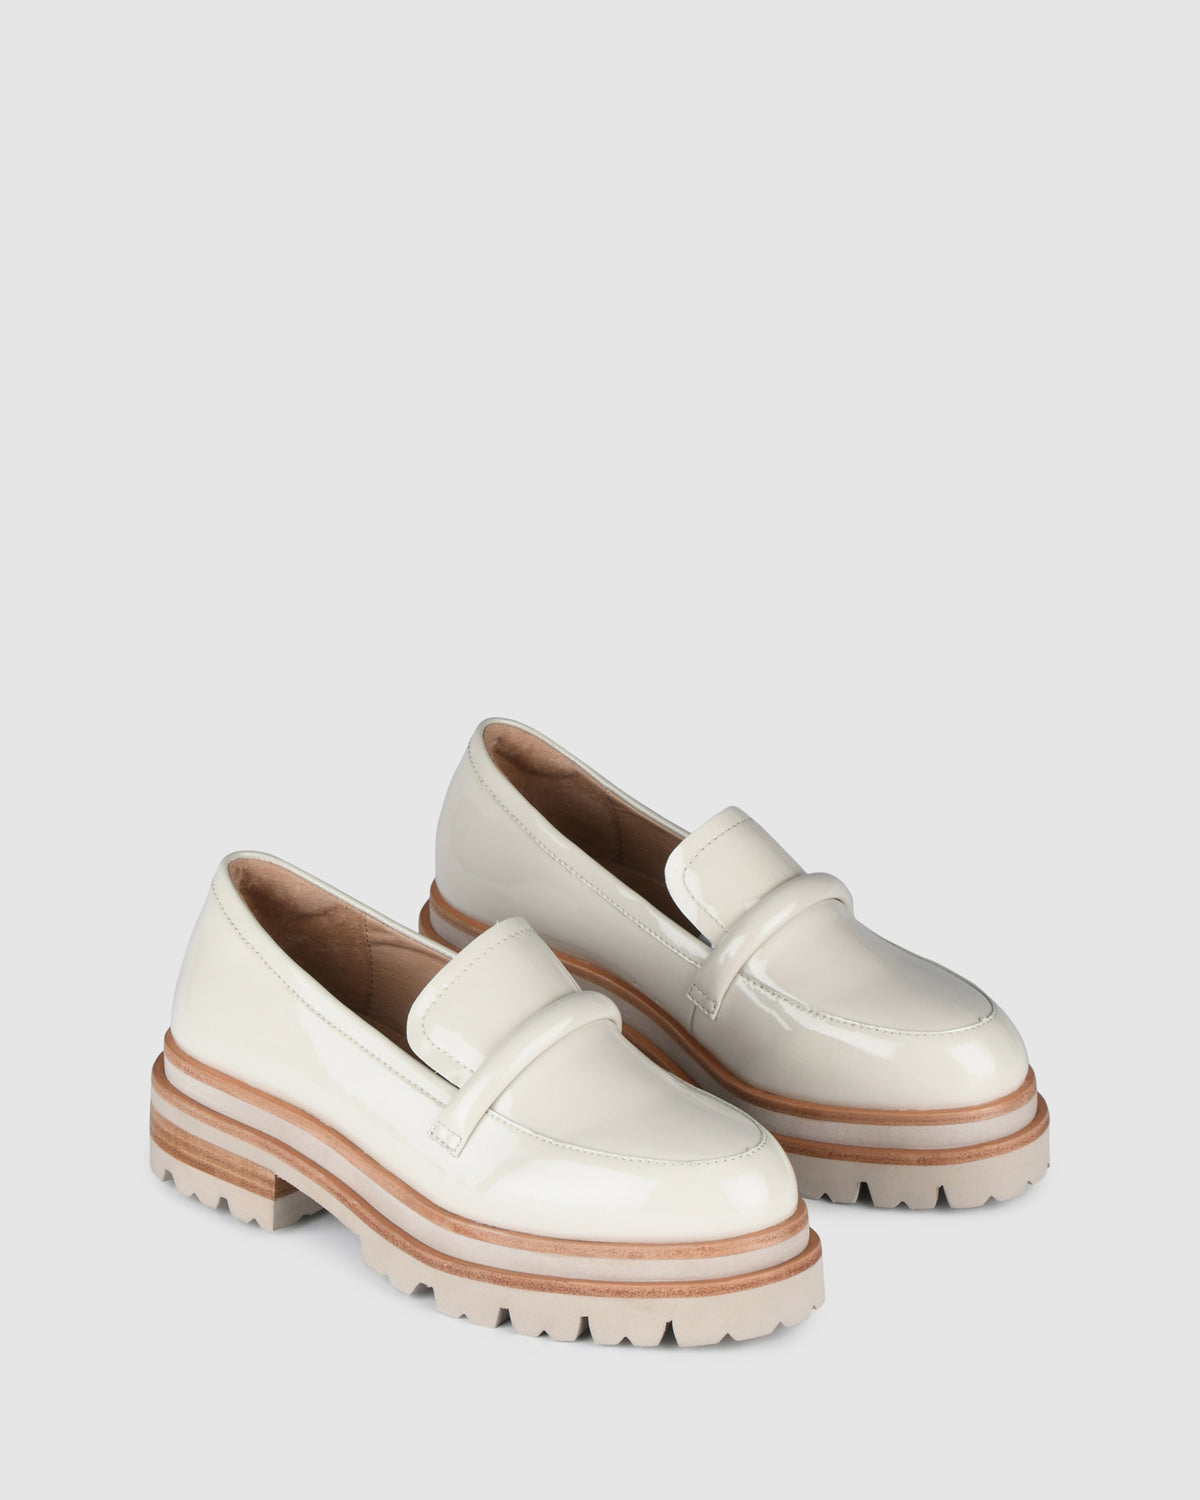 BELLE LOAFERS BONE PATENT